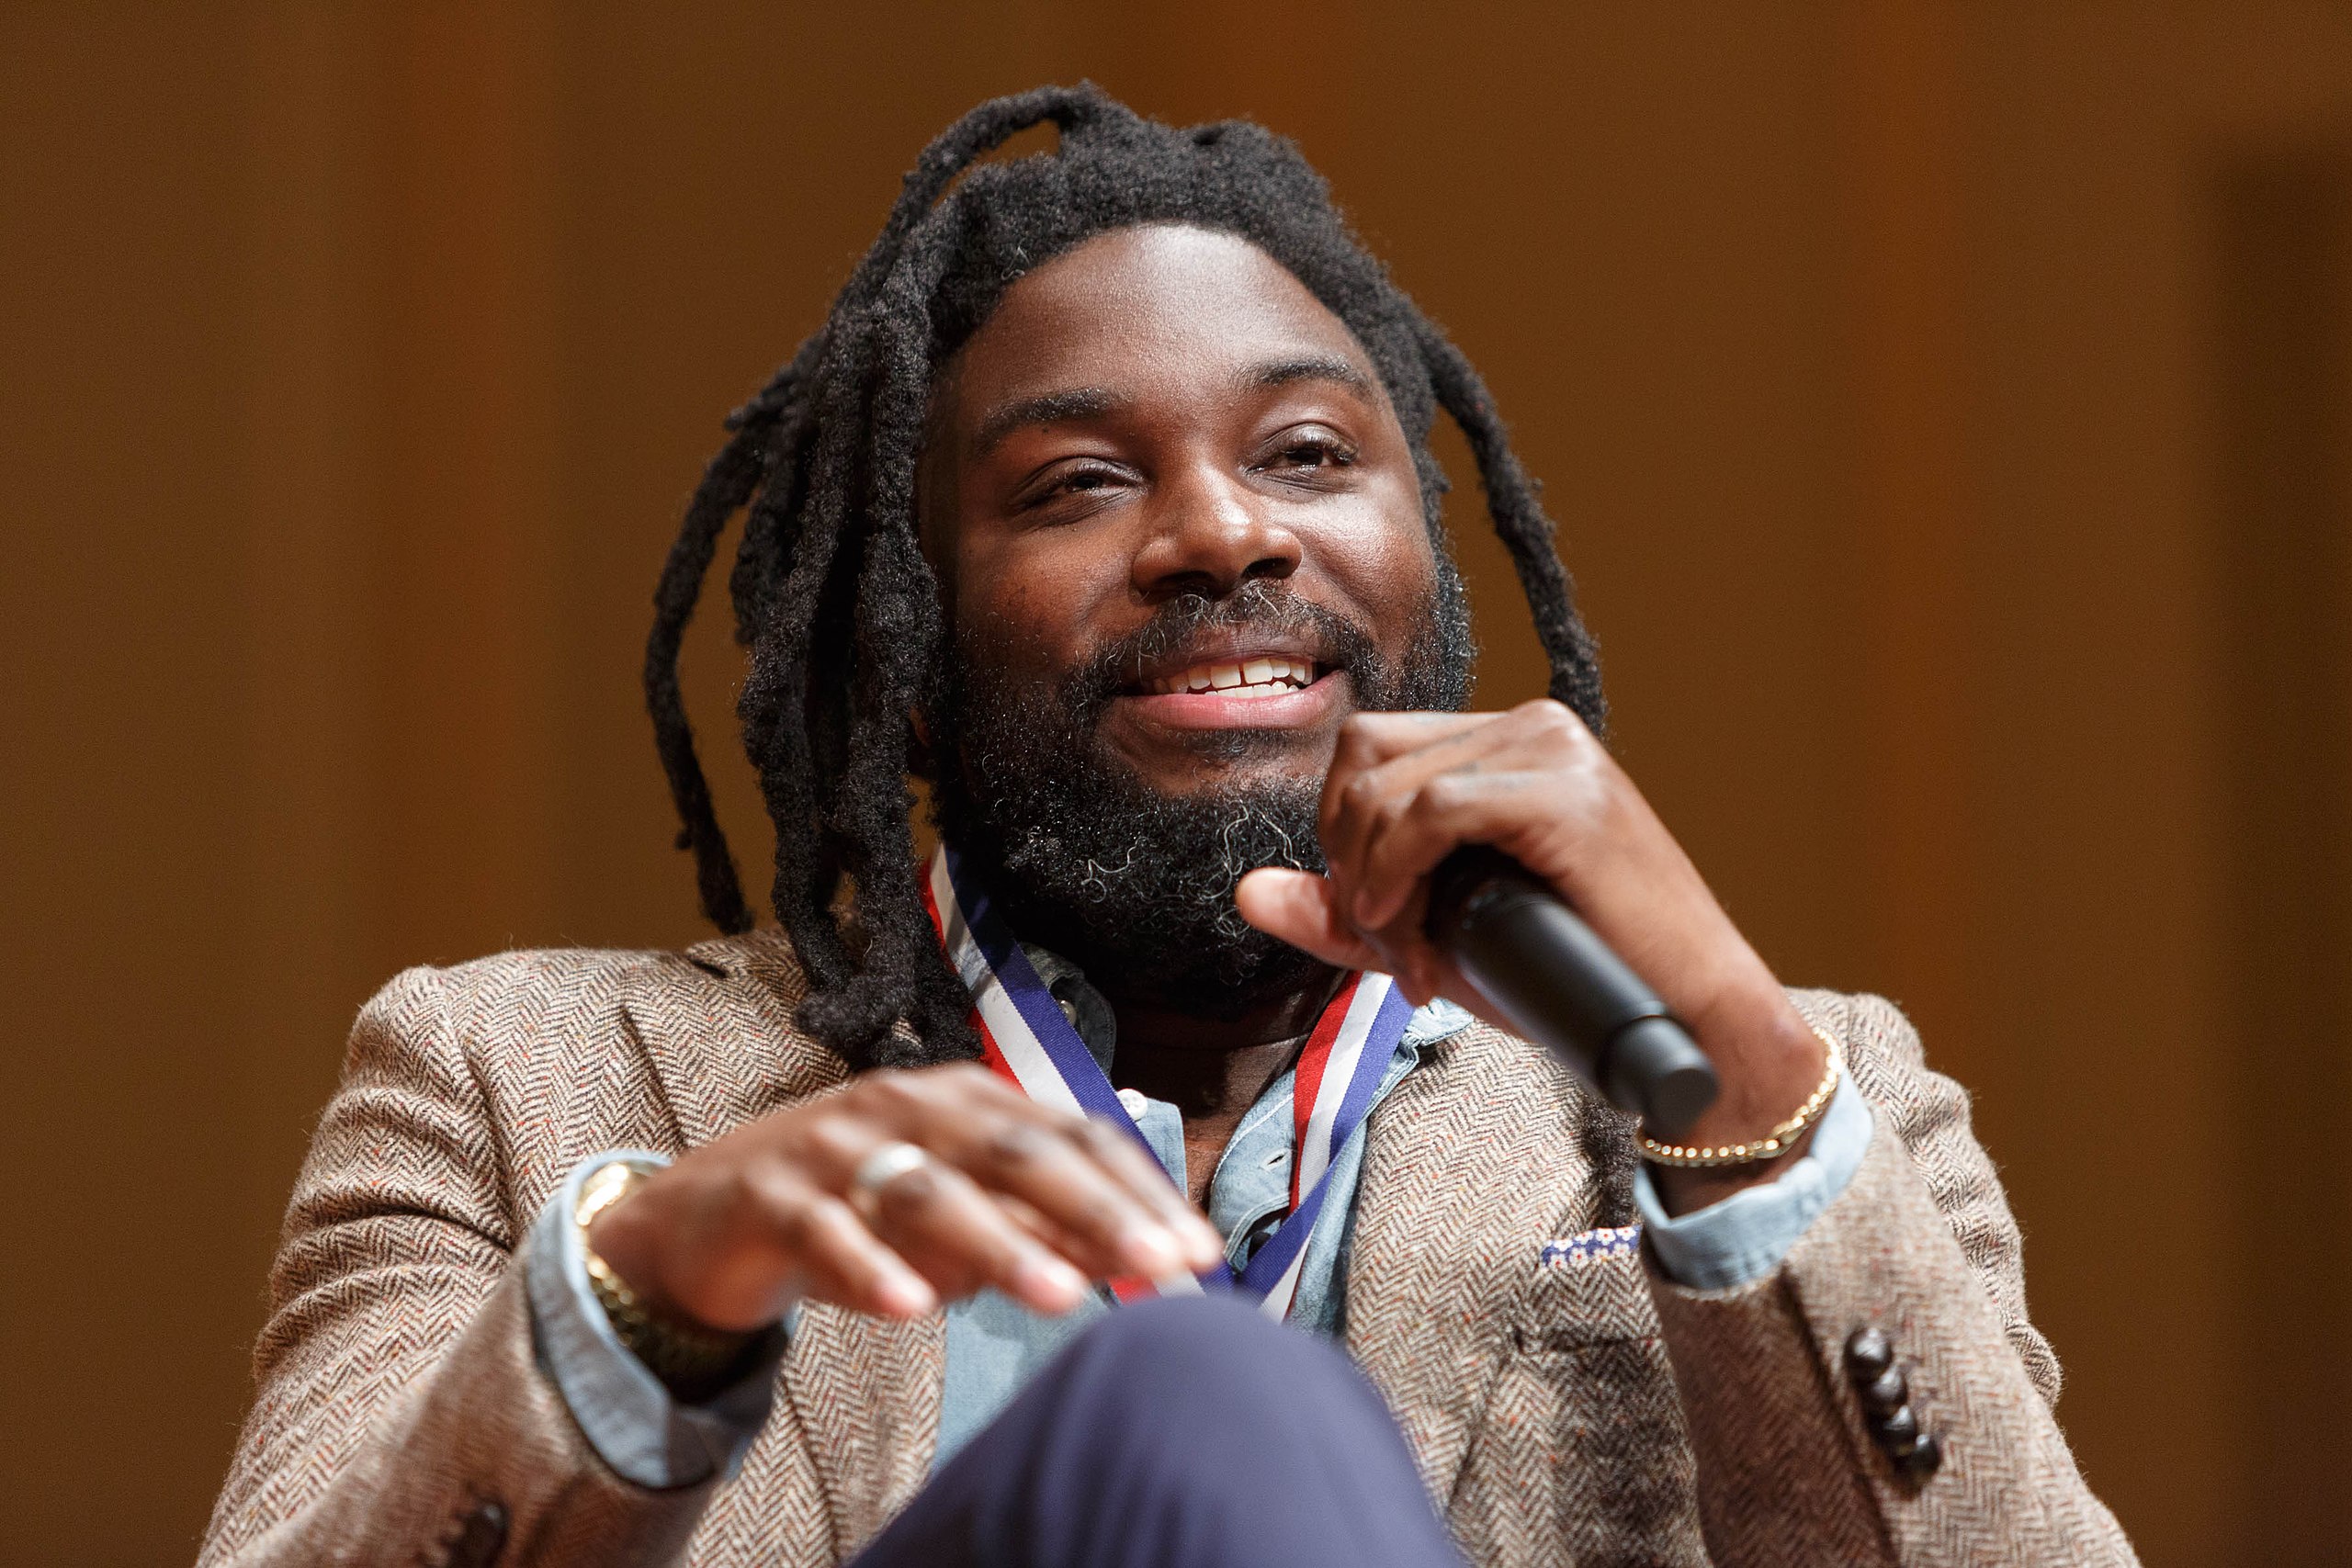 https://upload.wikimedia.org/wikipedia/commons/thumb/7/78/Ambassador_for_Young_People%27s_Literature_Jason_Reynolds.jpg/2560px-Ambassador_for_Young_People%27s_Literature_Jason_Reynolds.jpg